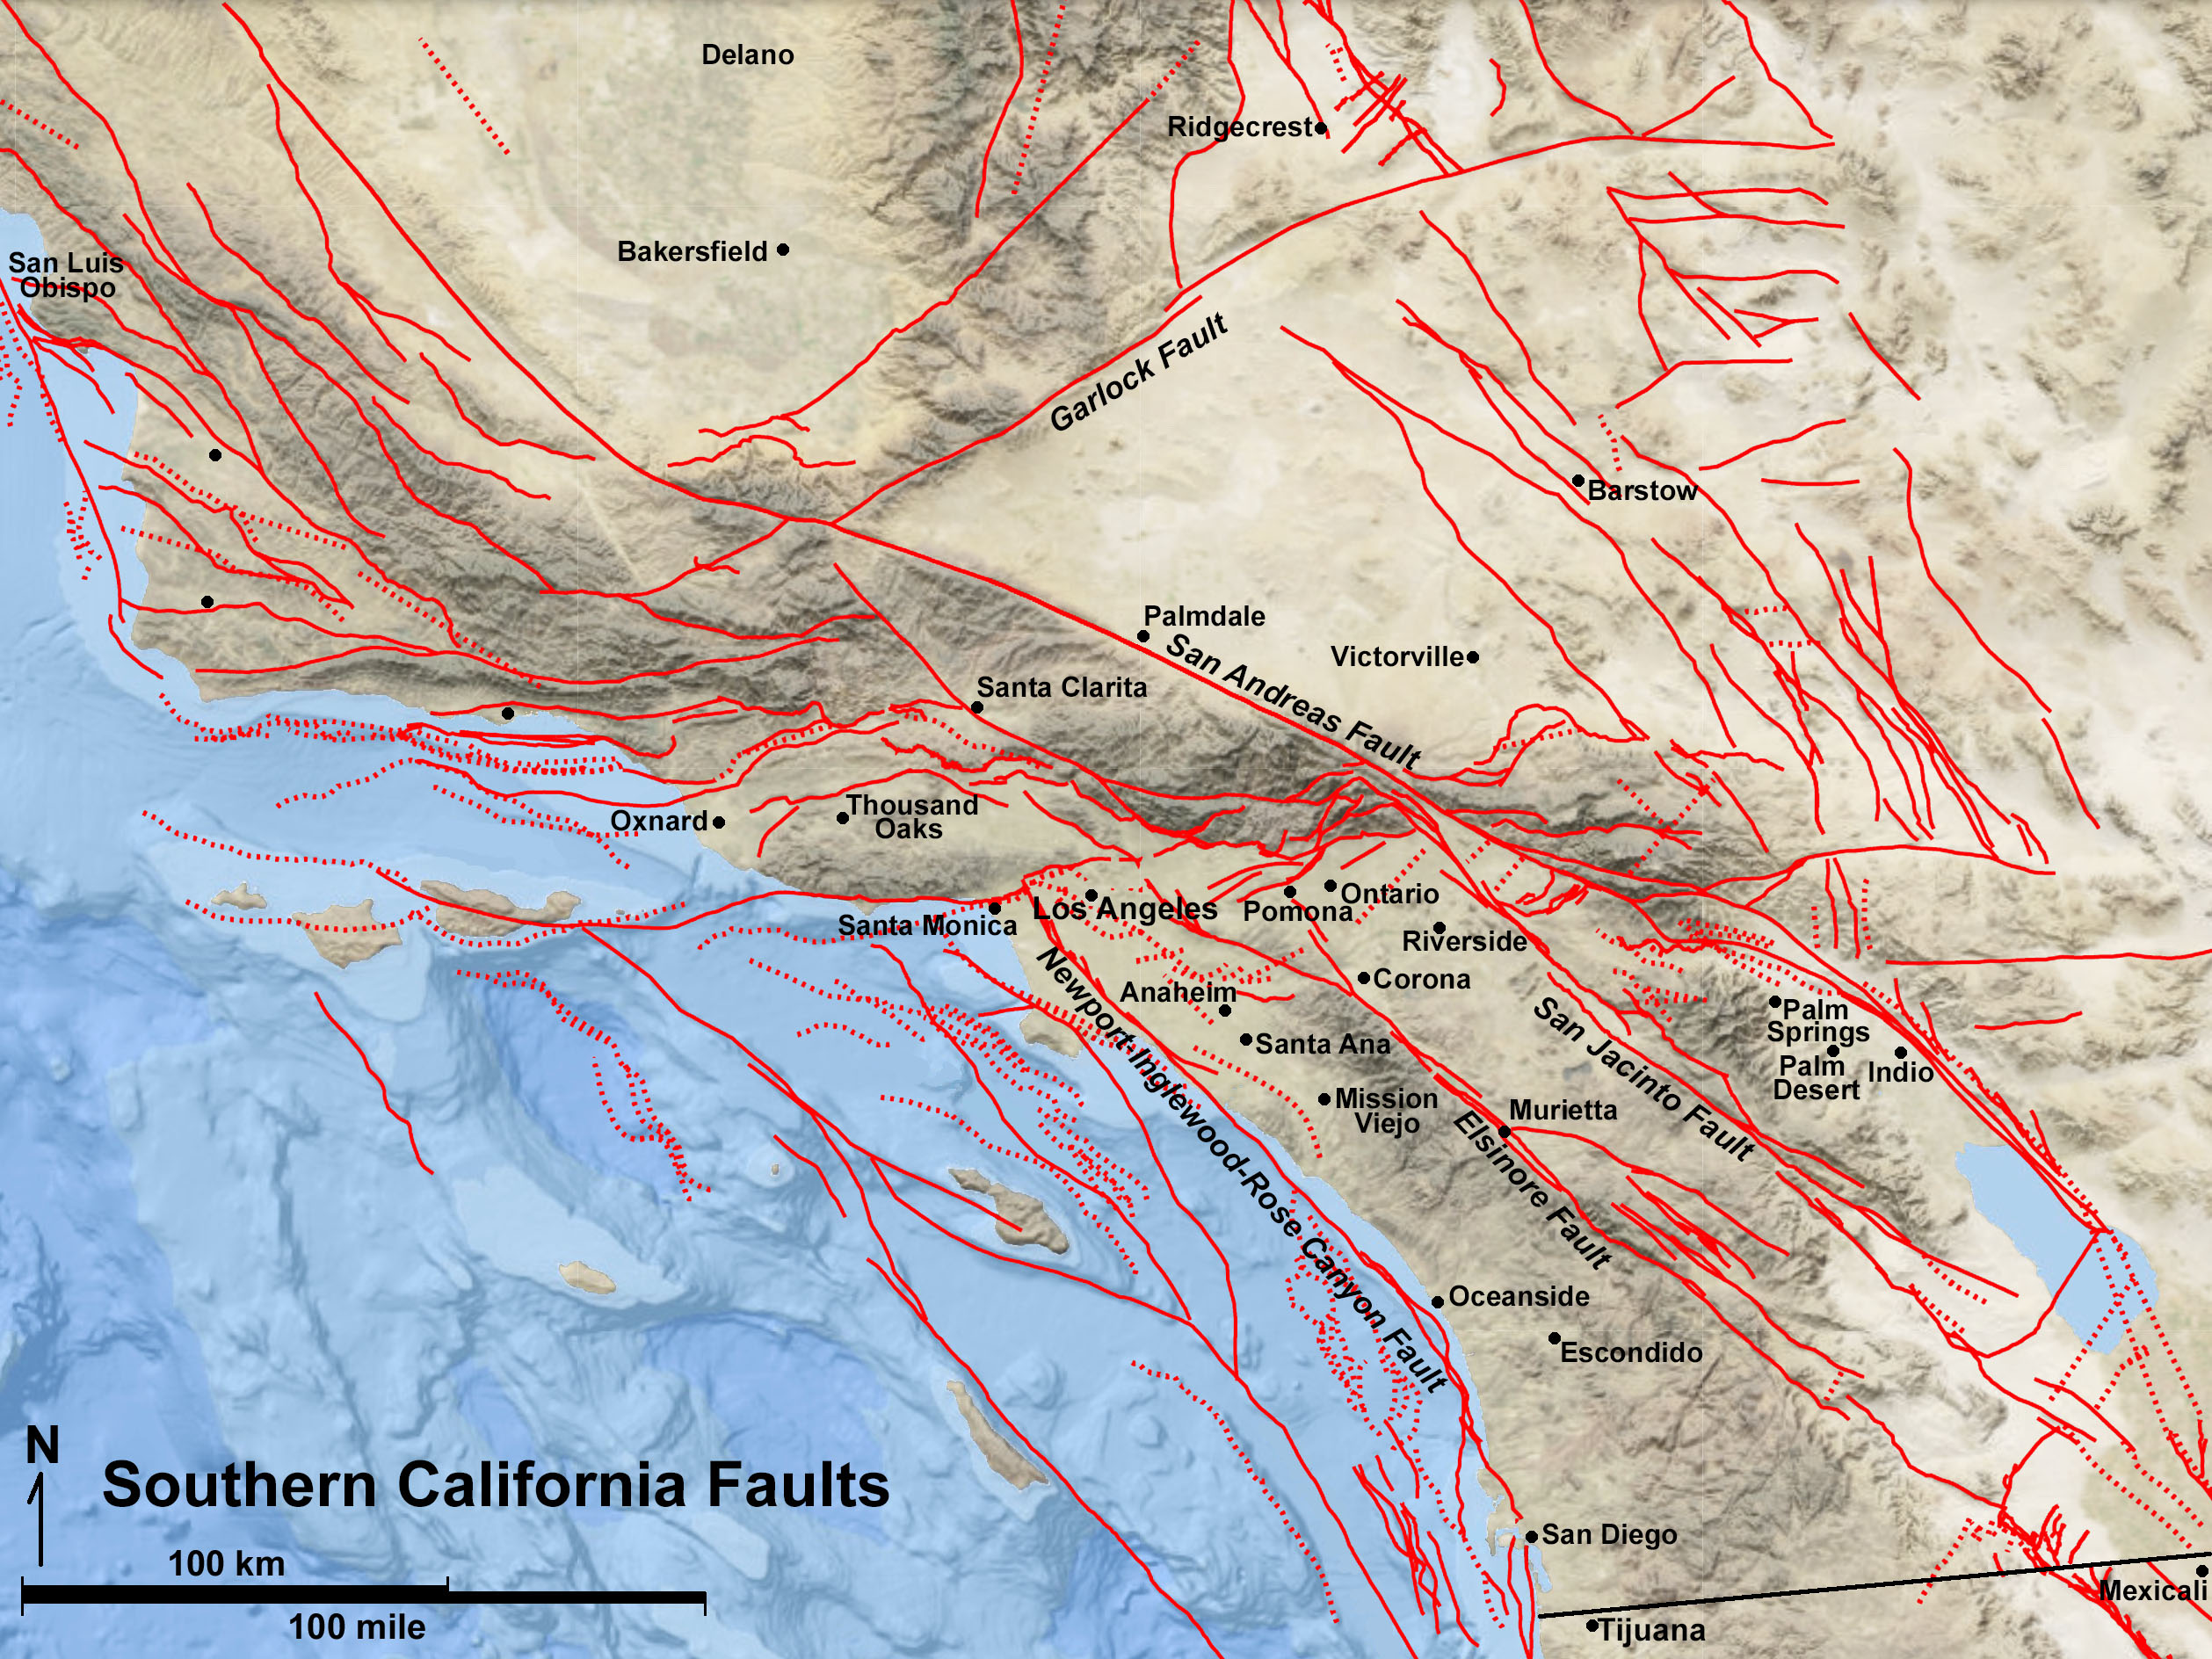 Elsinore Fault Zone, Southern California